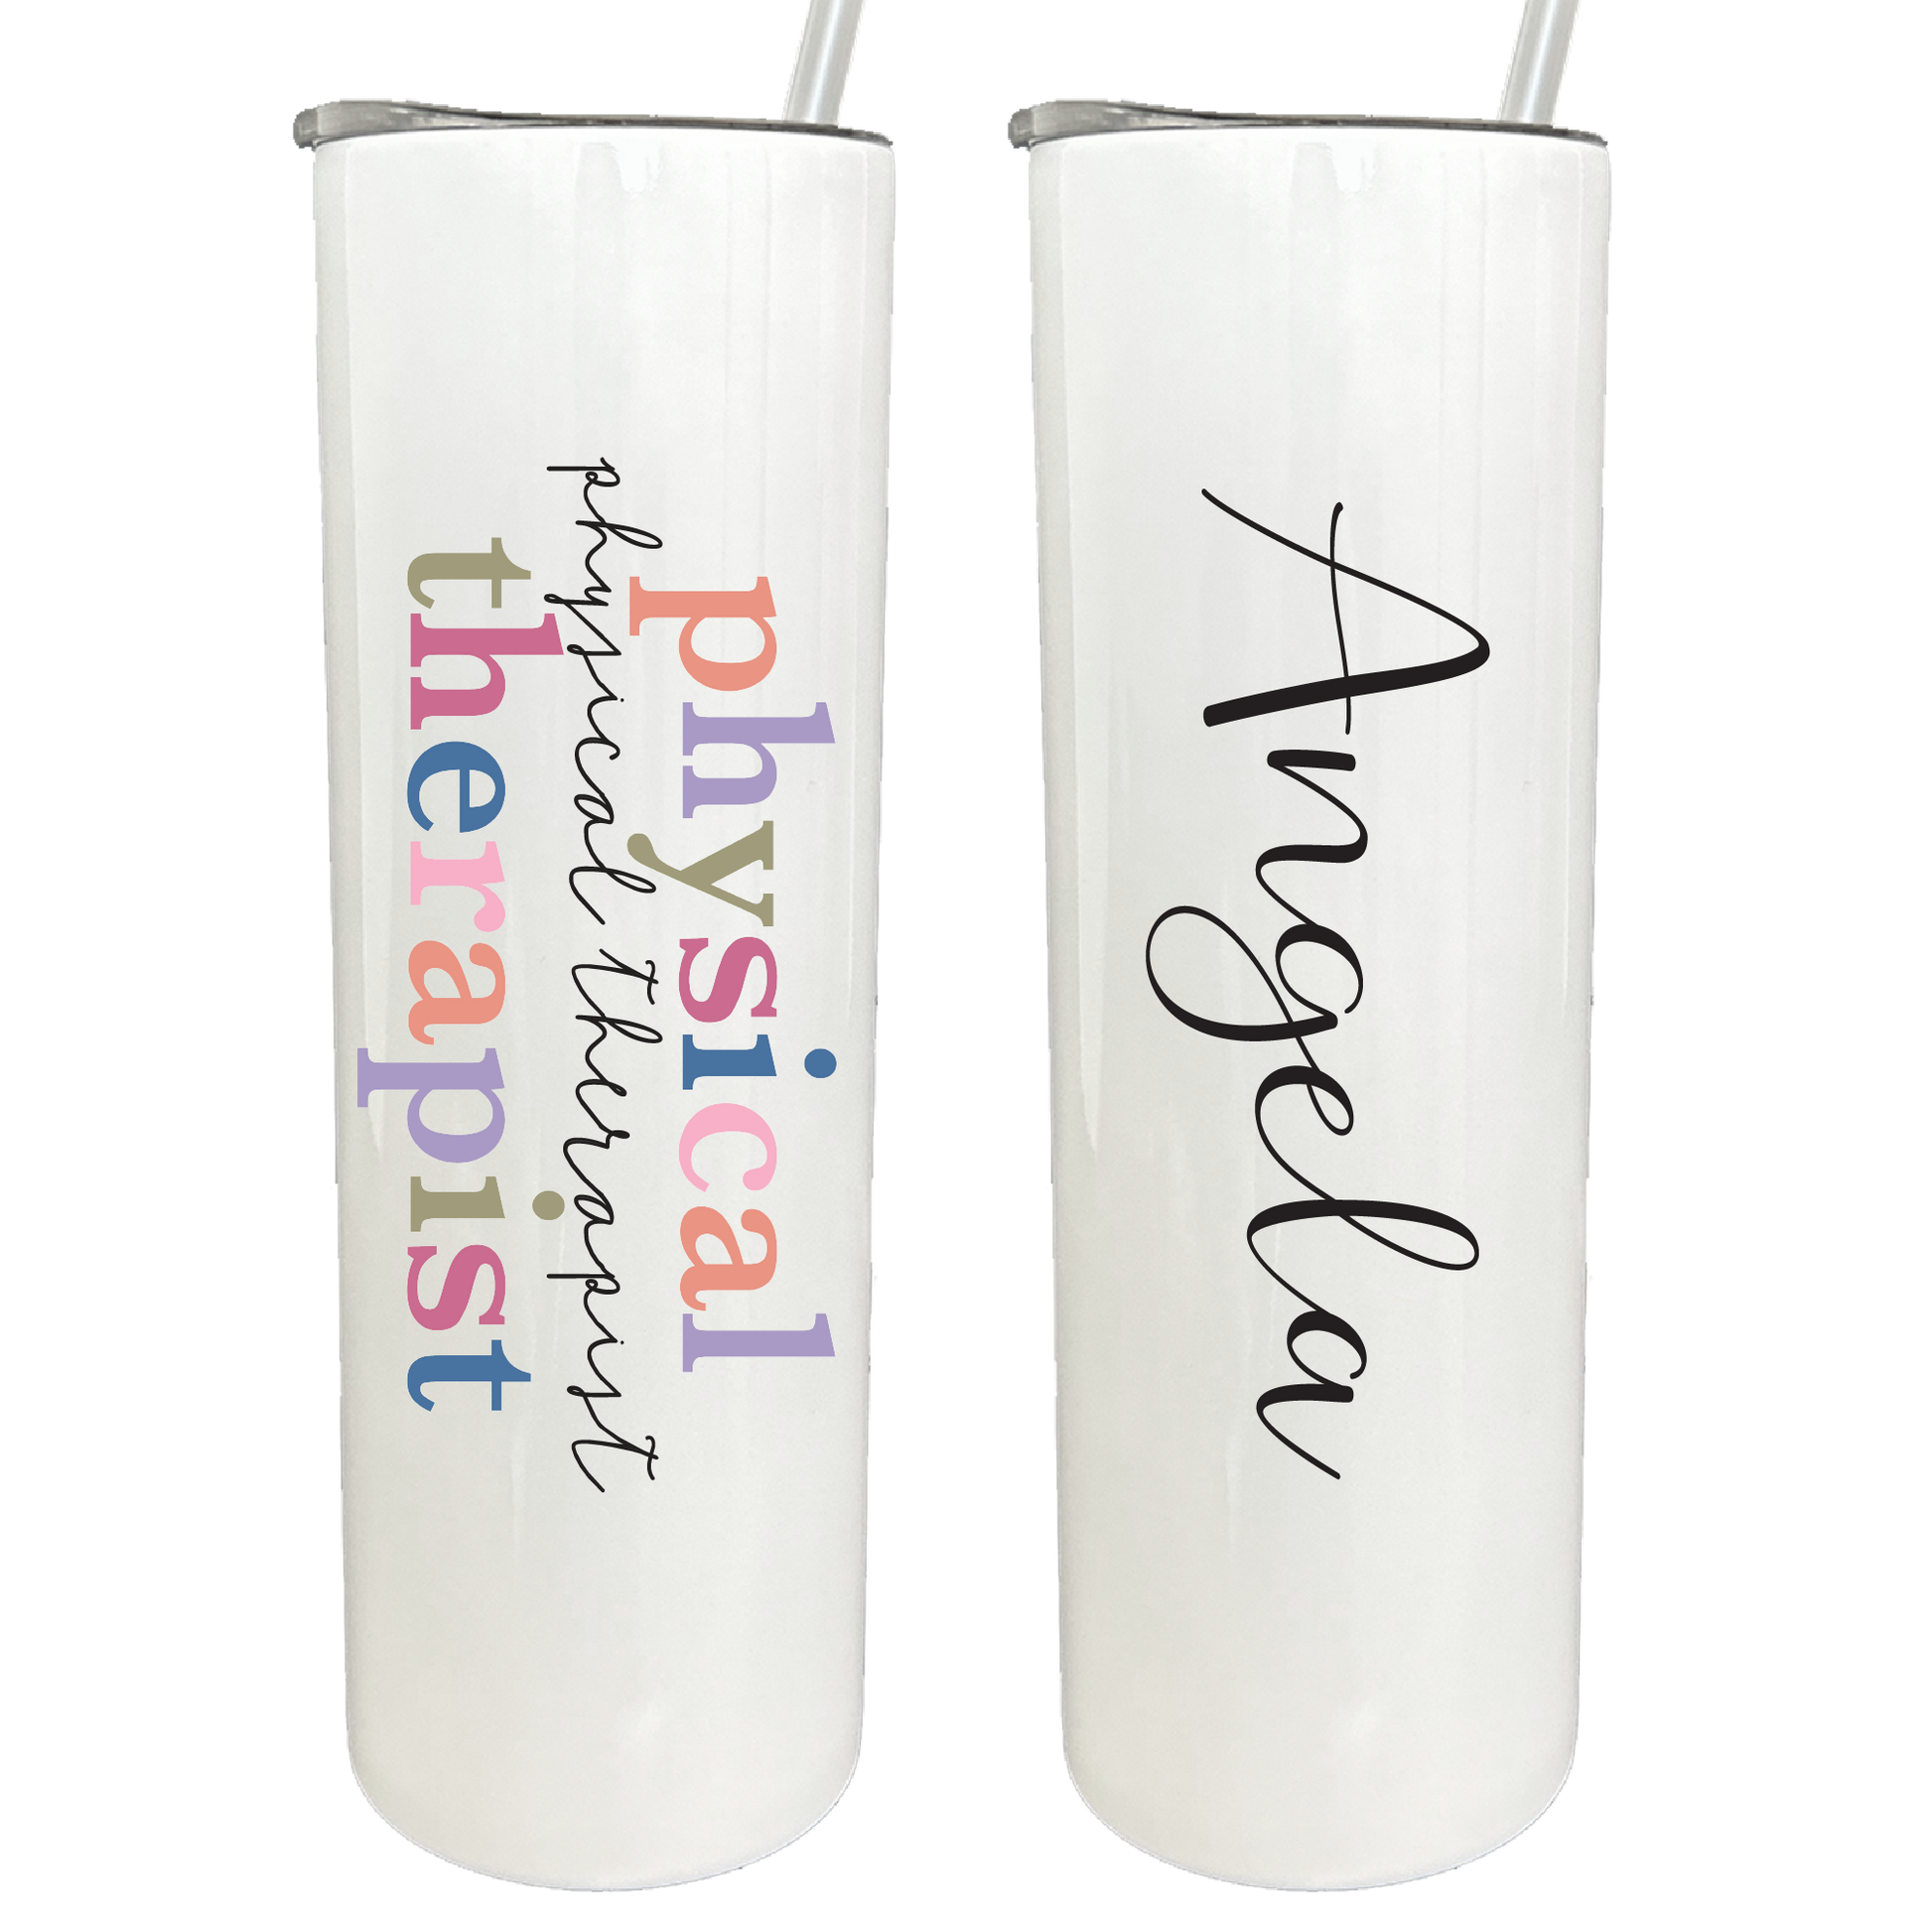 Personalized 30 oz Insulated Stainless Steel Tumbler - White